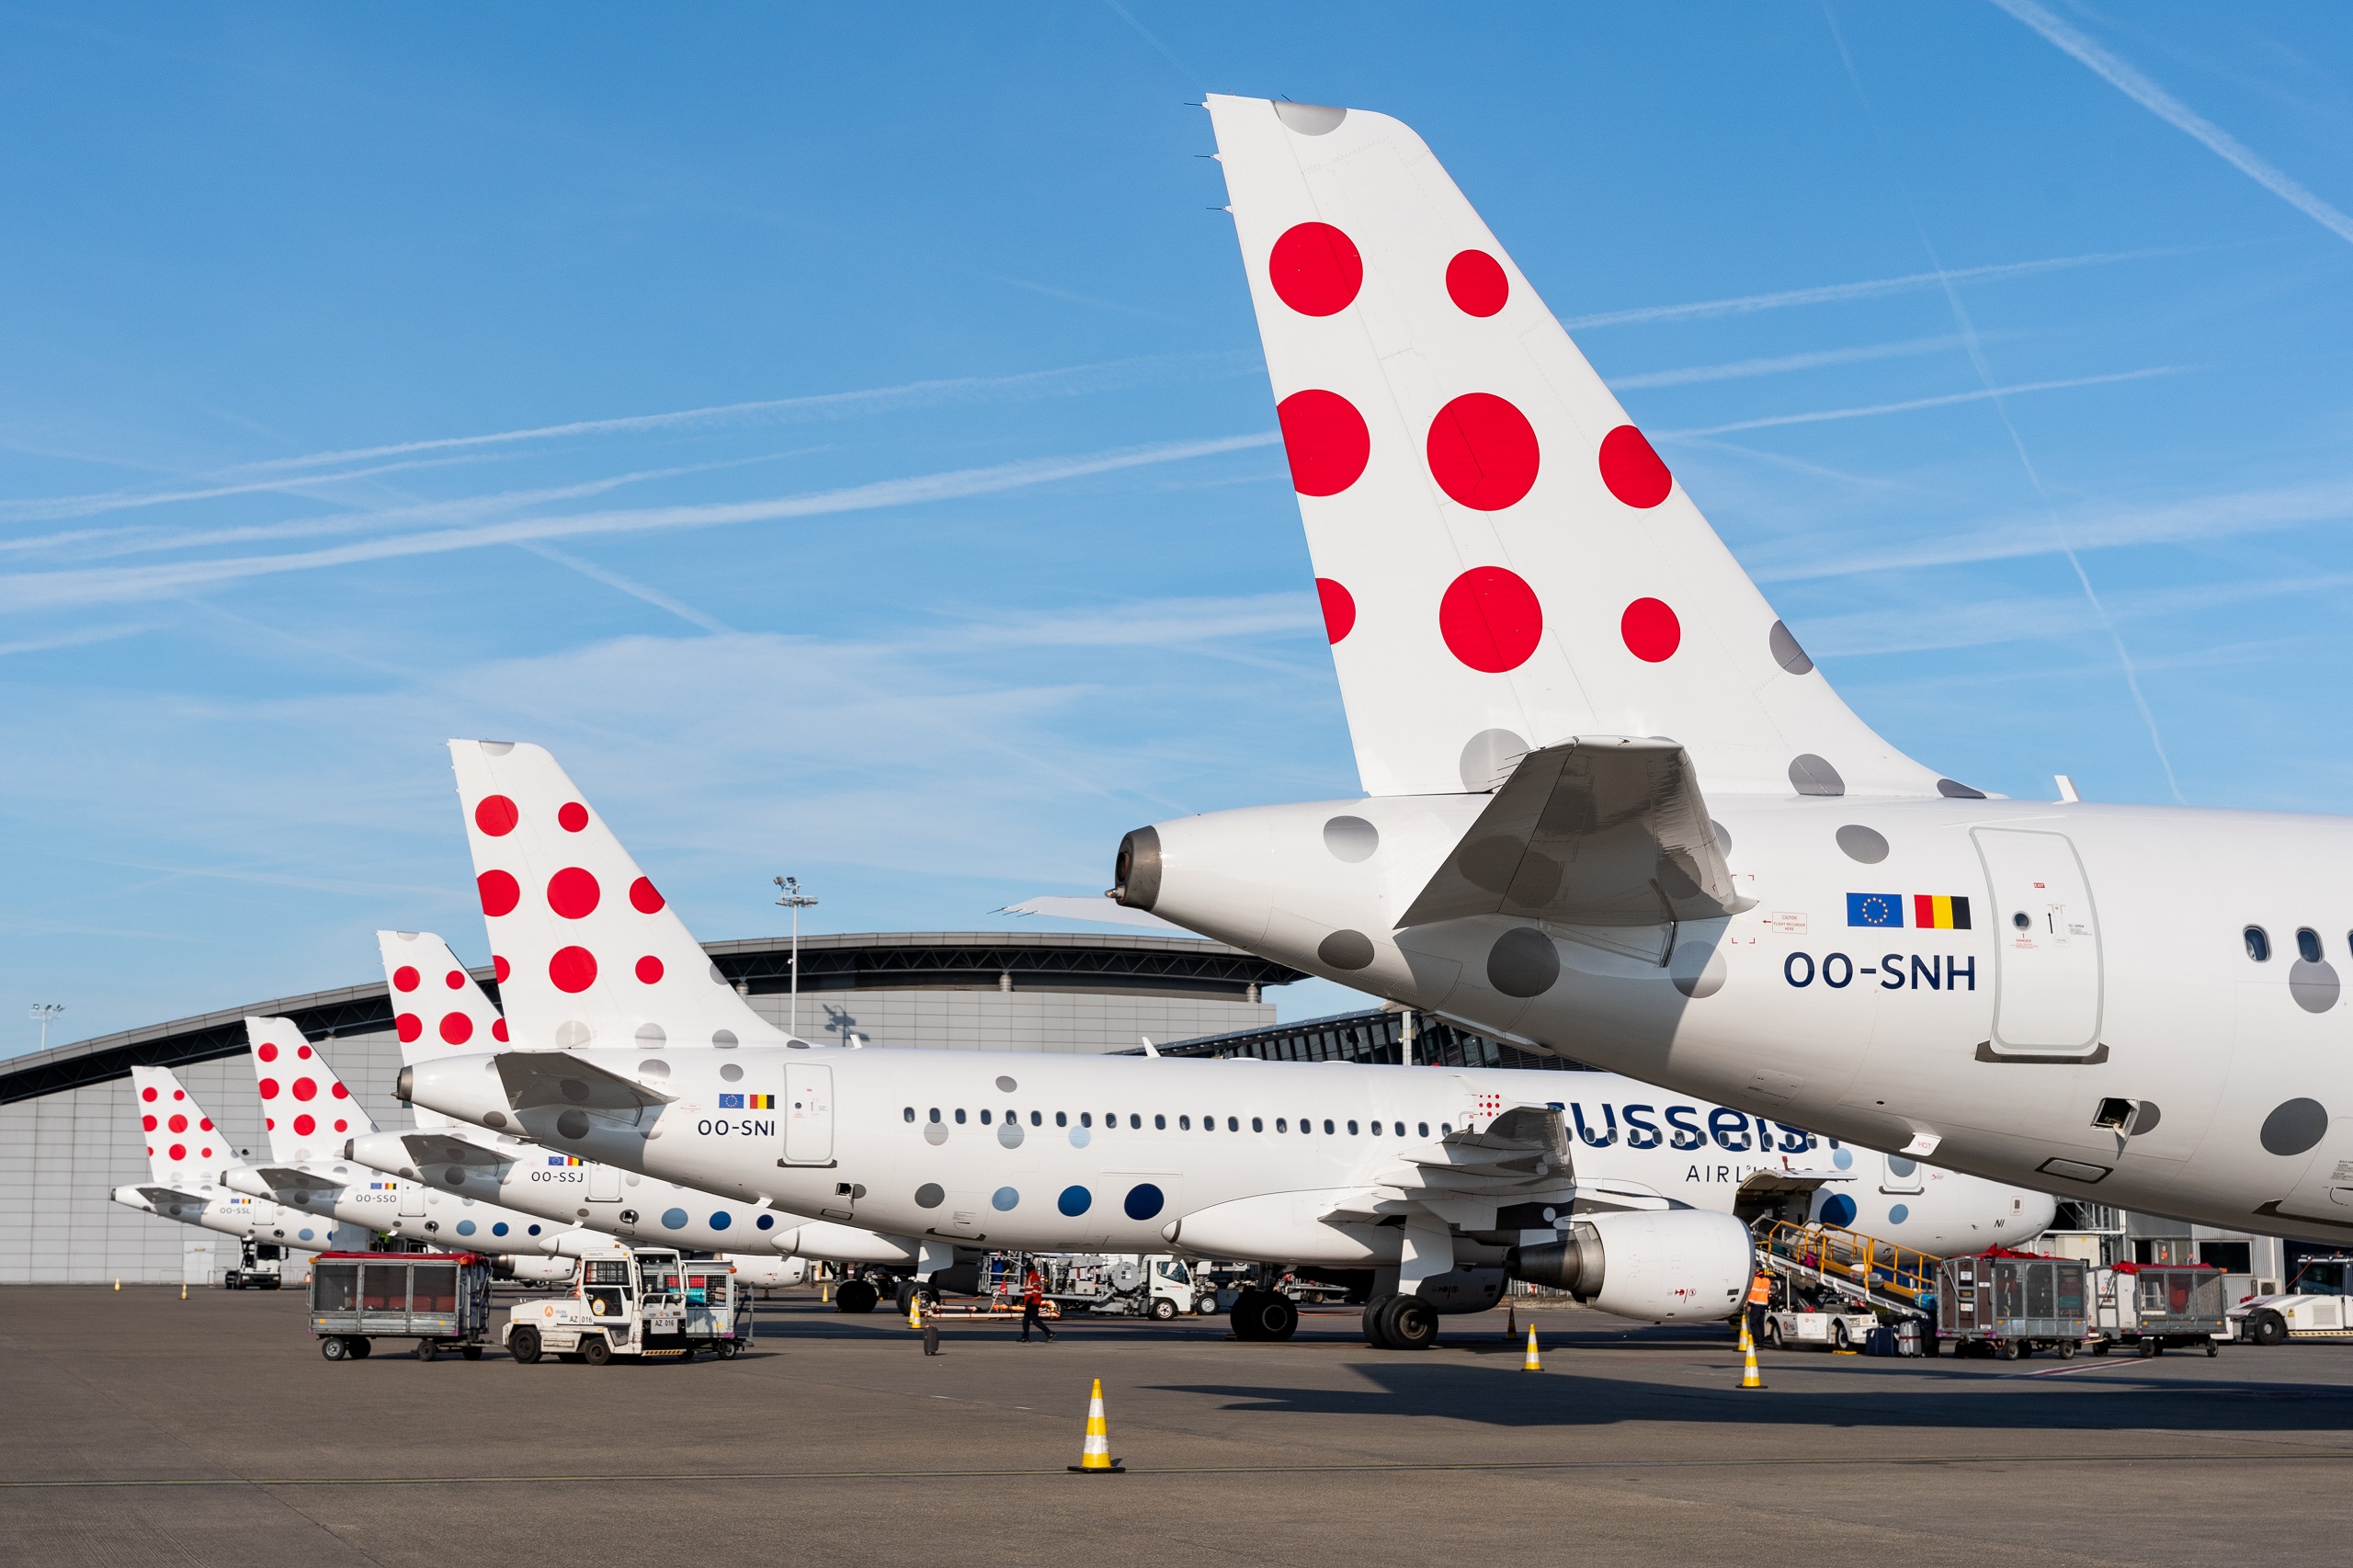 The picture shows five white planes with red spots on their tail wings. The planes are located at the airport.